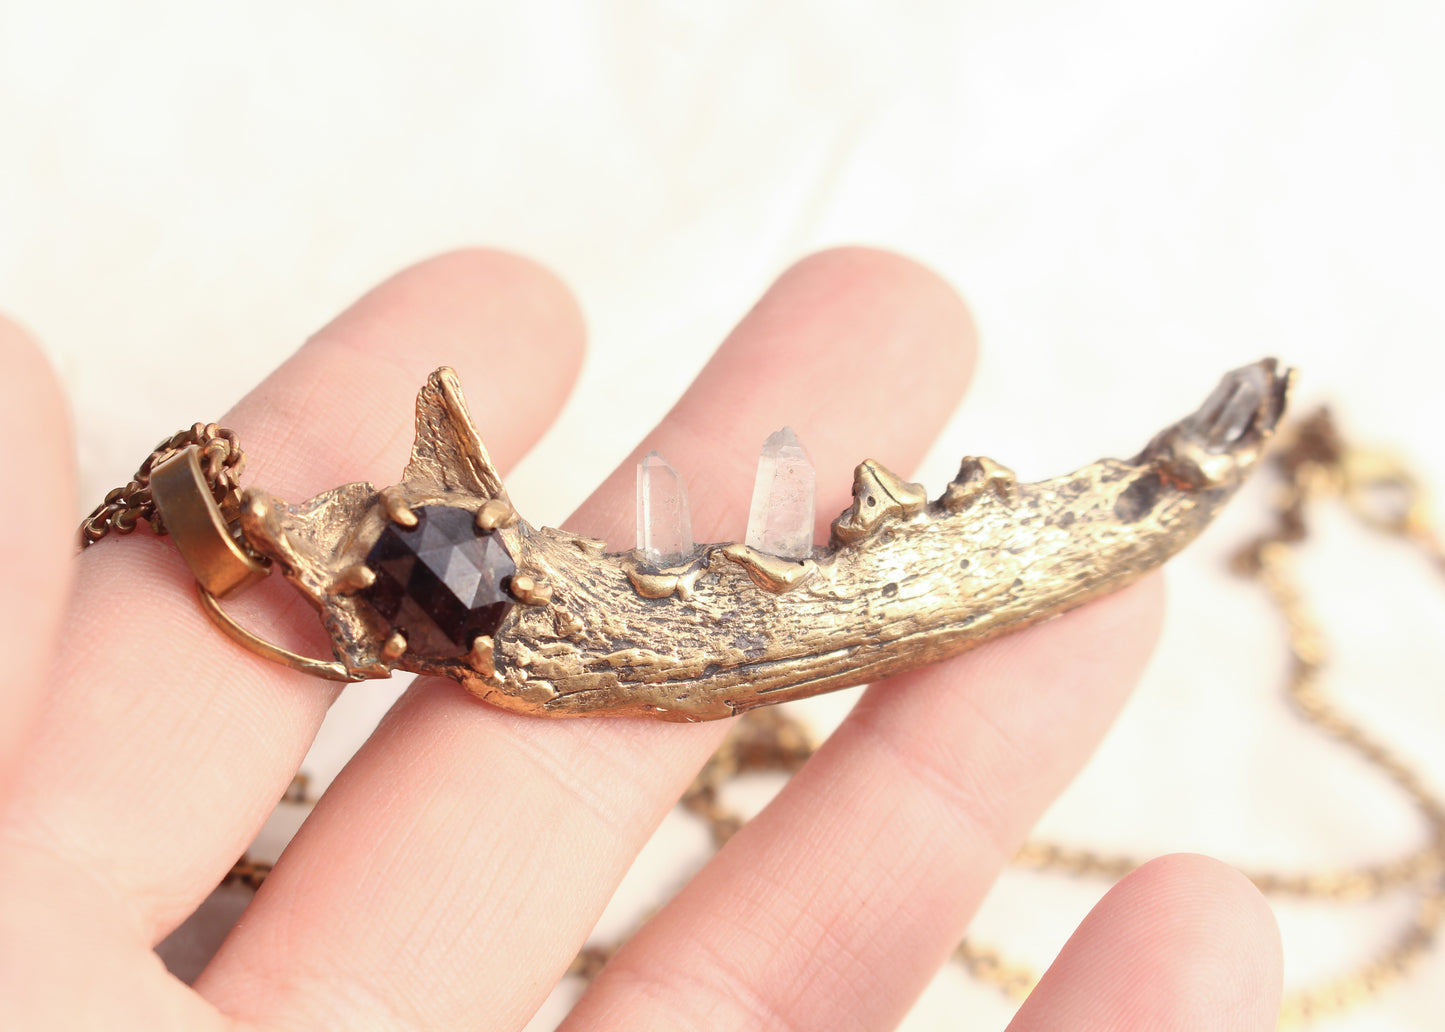 Faceted Garnet Jawbone with Quartz teeth necklace